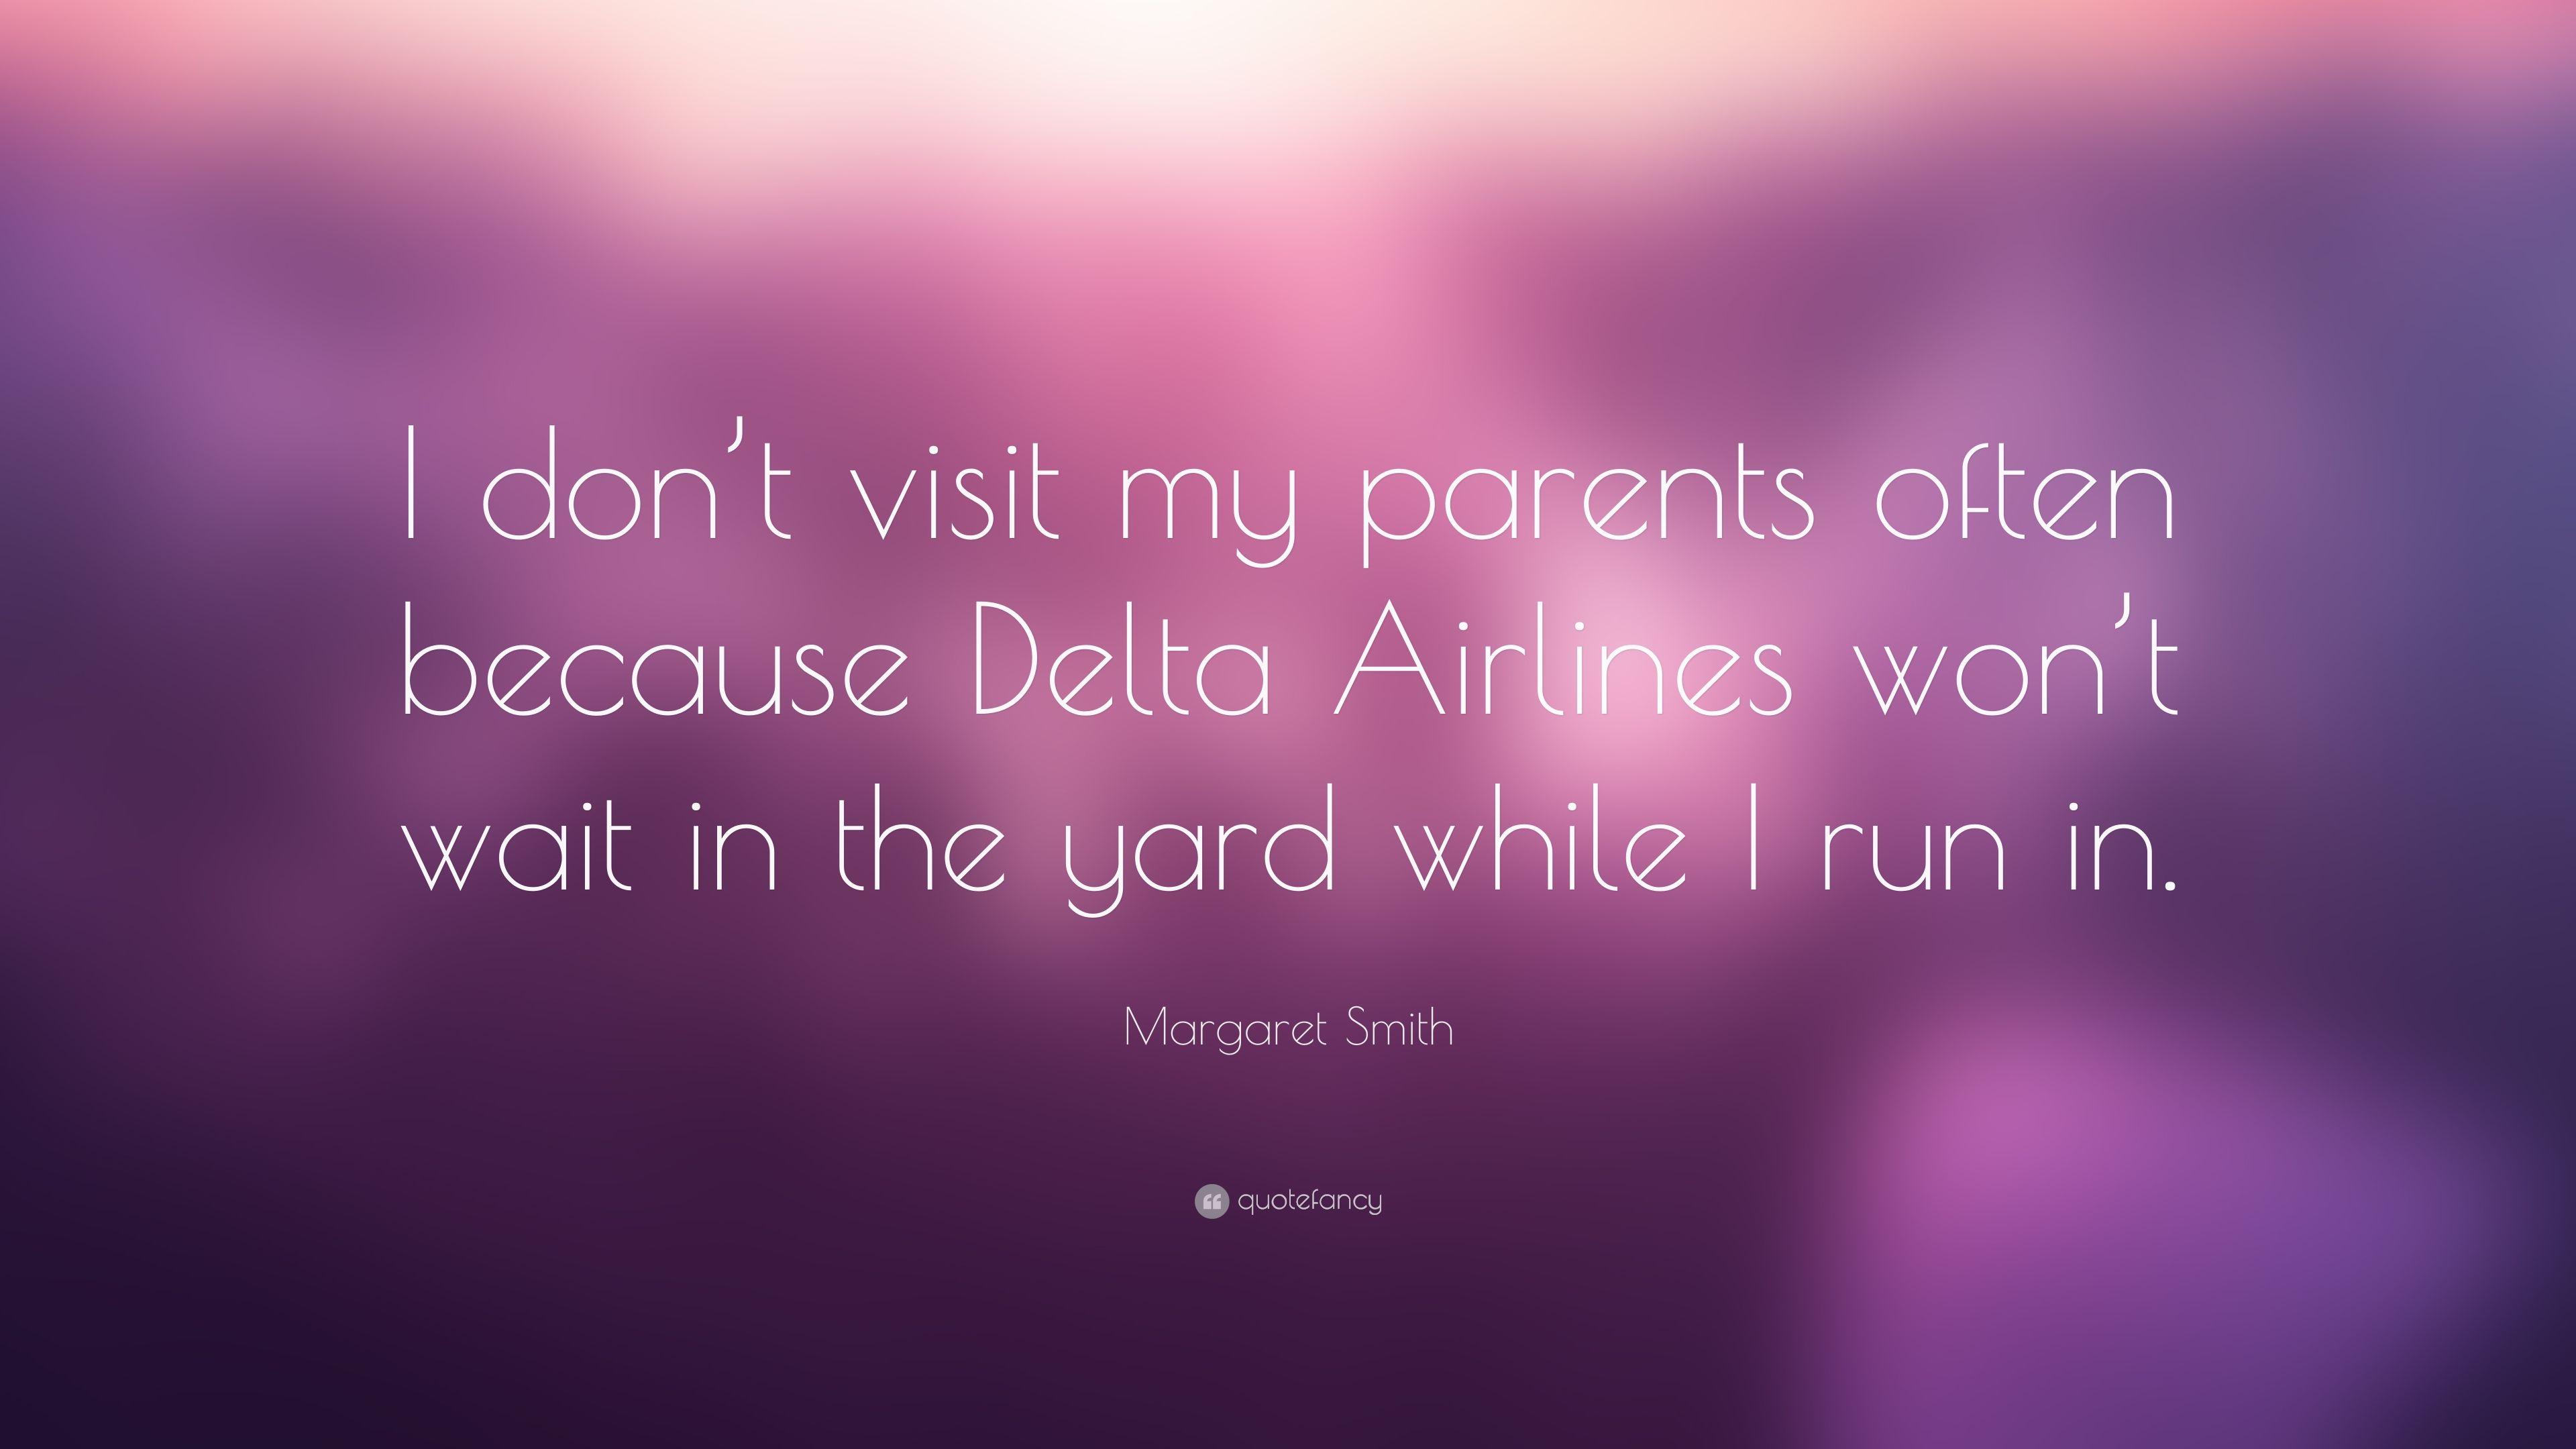 Margaret Smith Quote: “I don't visit my parents often because Delta